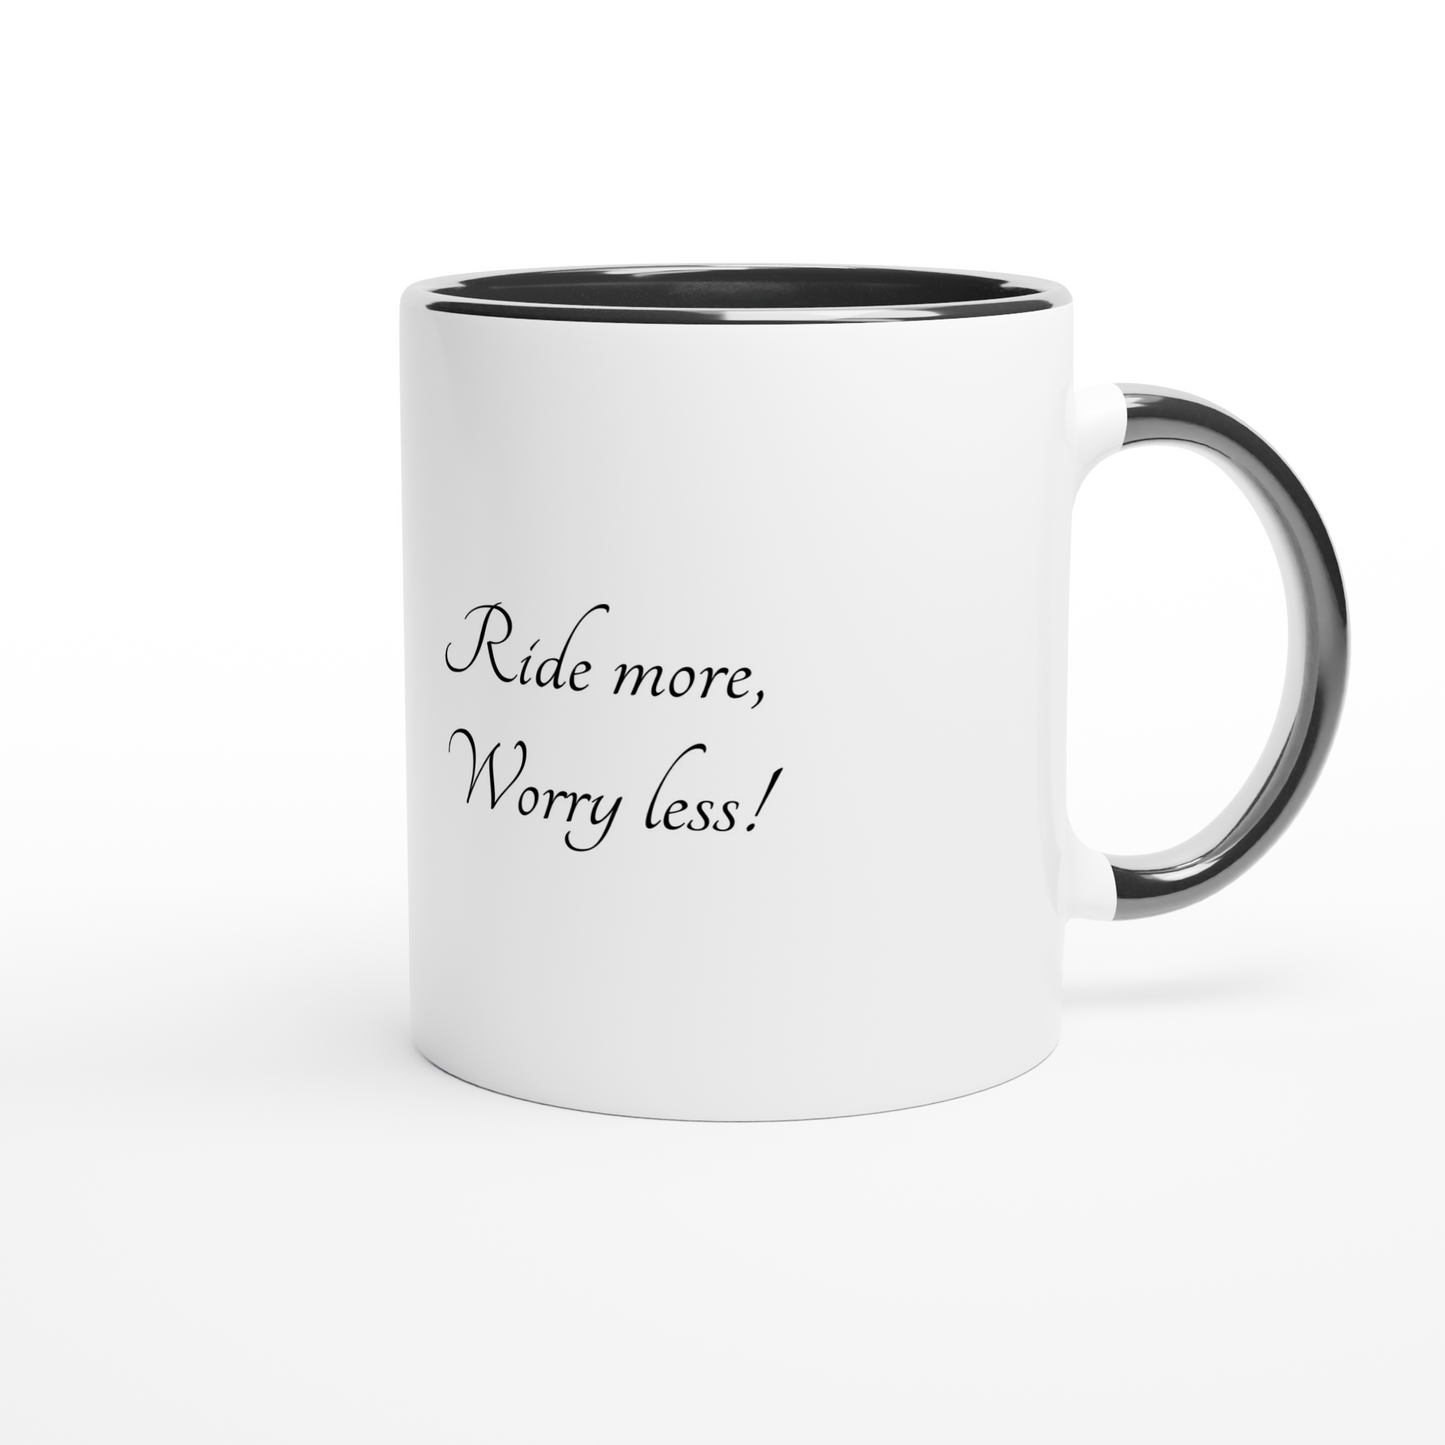 Hand Drawn Horse || 11 oz Ceramic Mug with Color - Design: "Going Riding"; Static Design; Personalizable Text